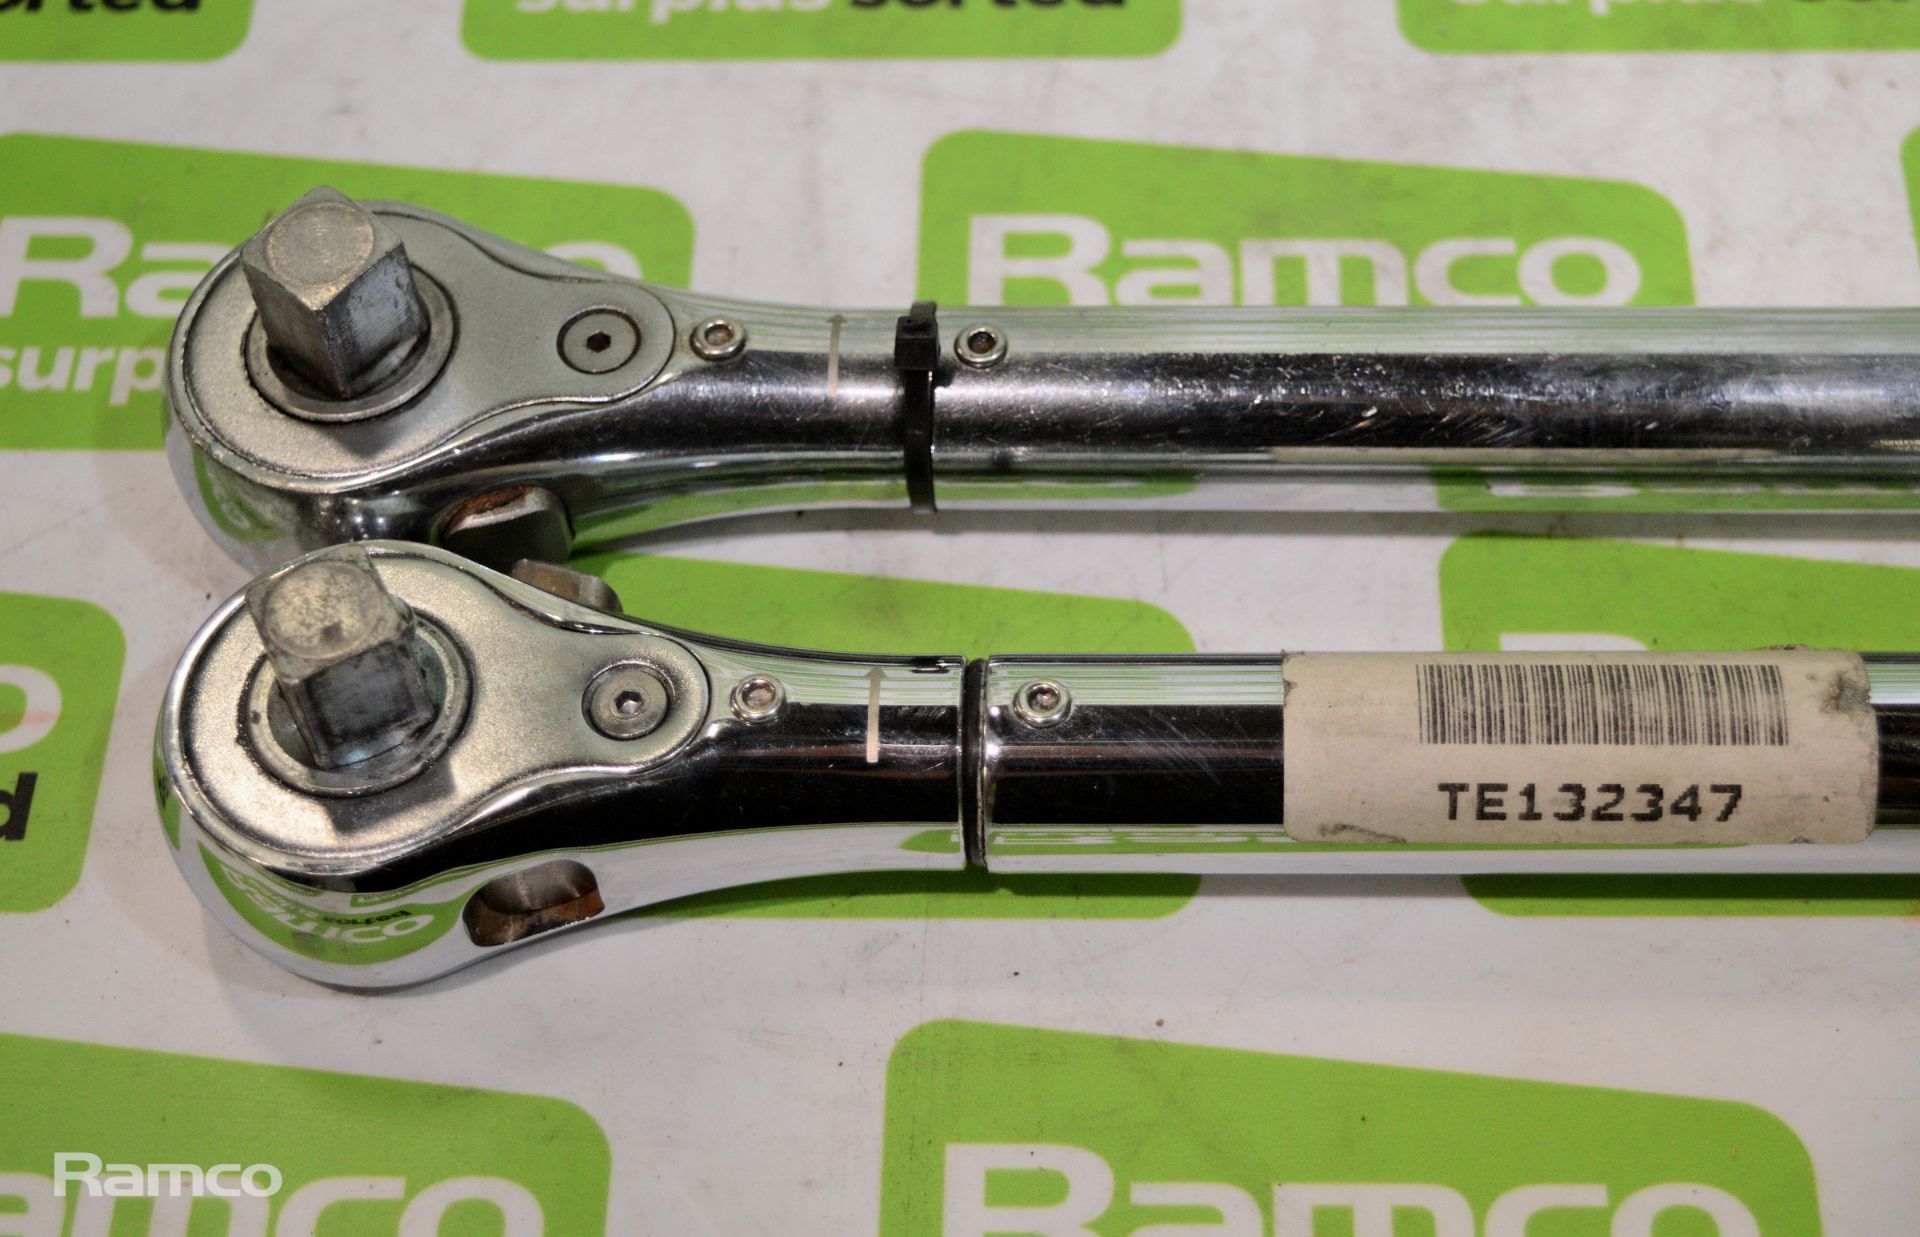 2x Norbar TT250 torque wrenches 50-250 N.m 1/2 inch sq drive - Image 2 of 3